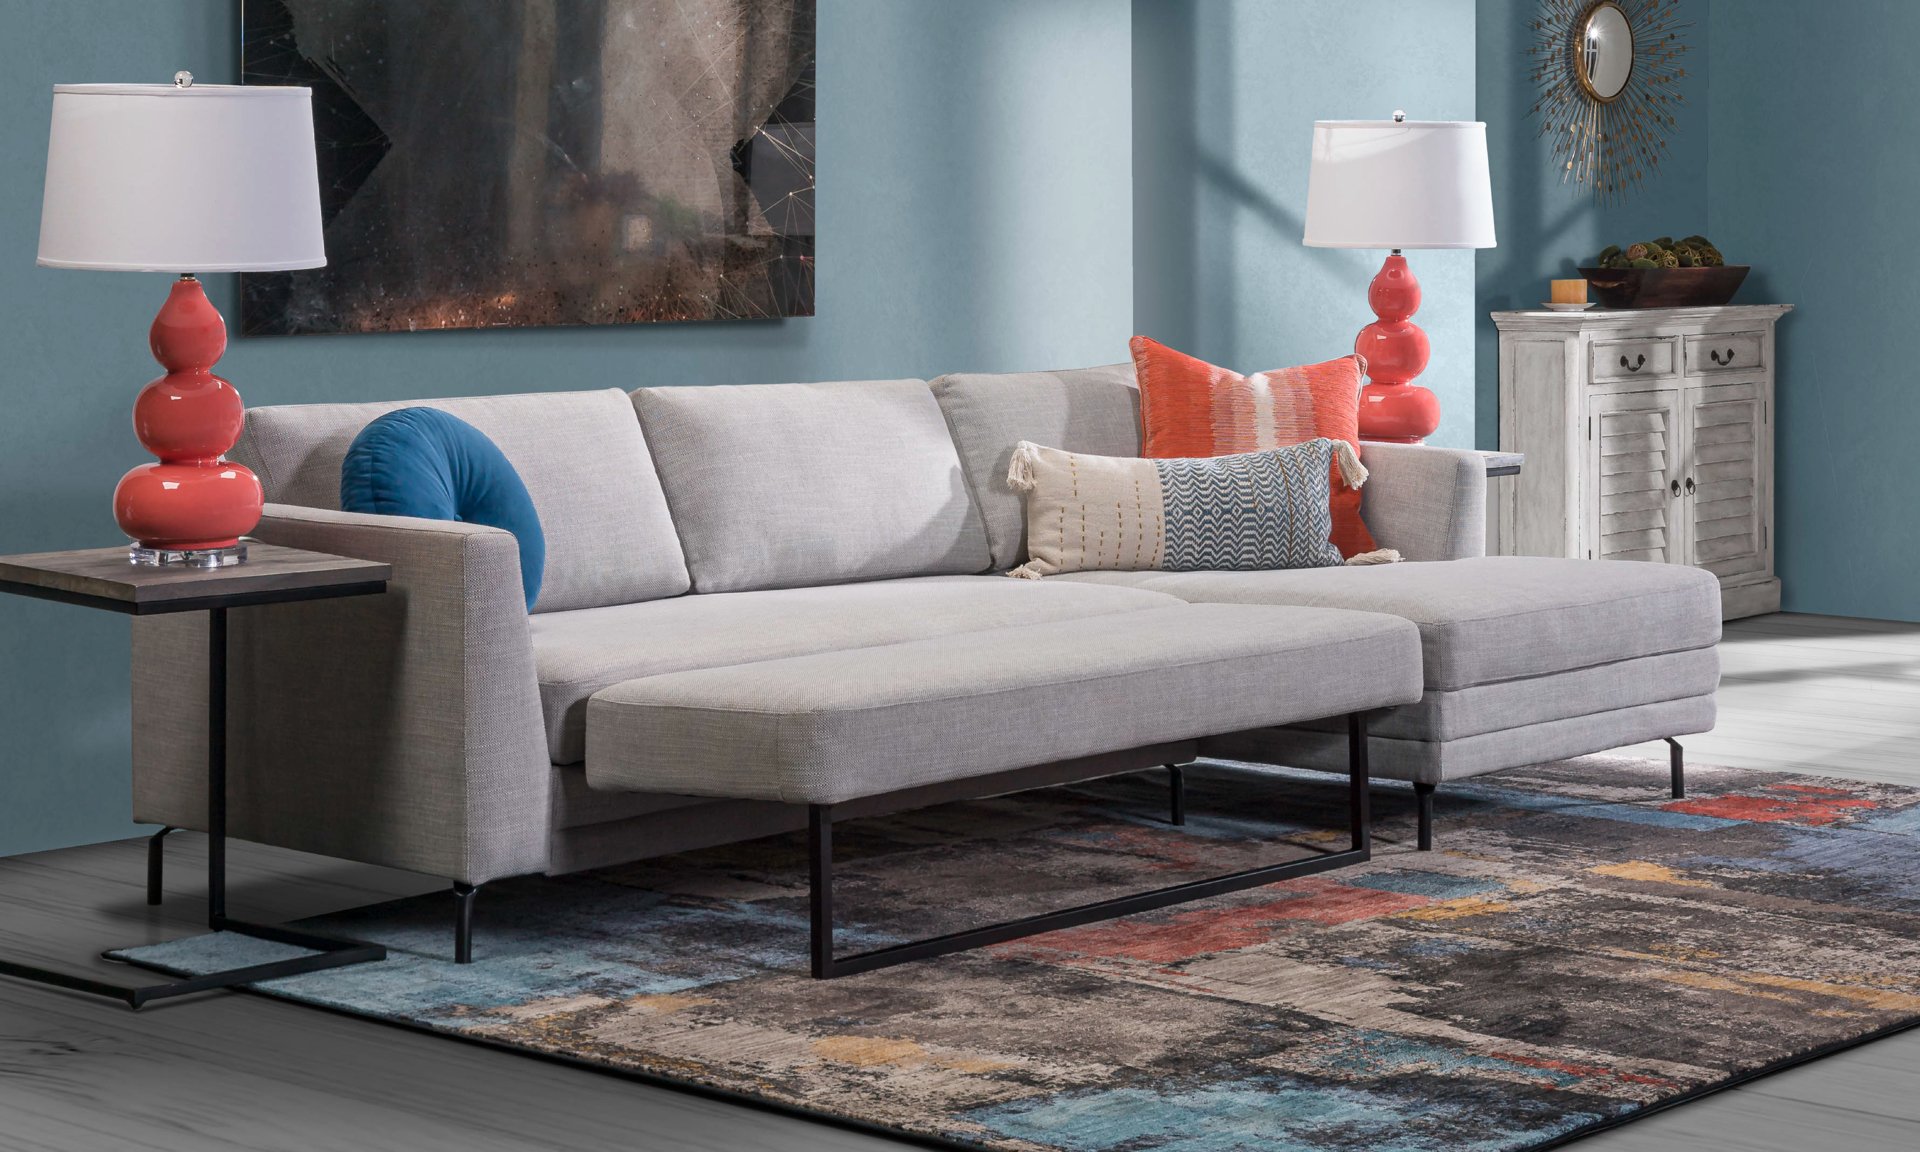 Sleeper sofa in a gray tone that can easily accommodate guests who stay over.